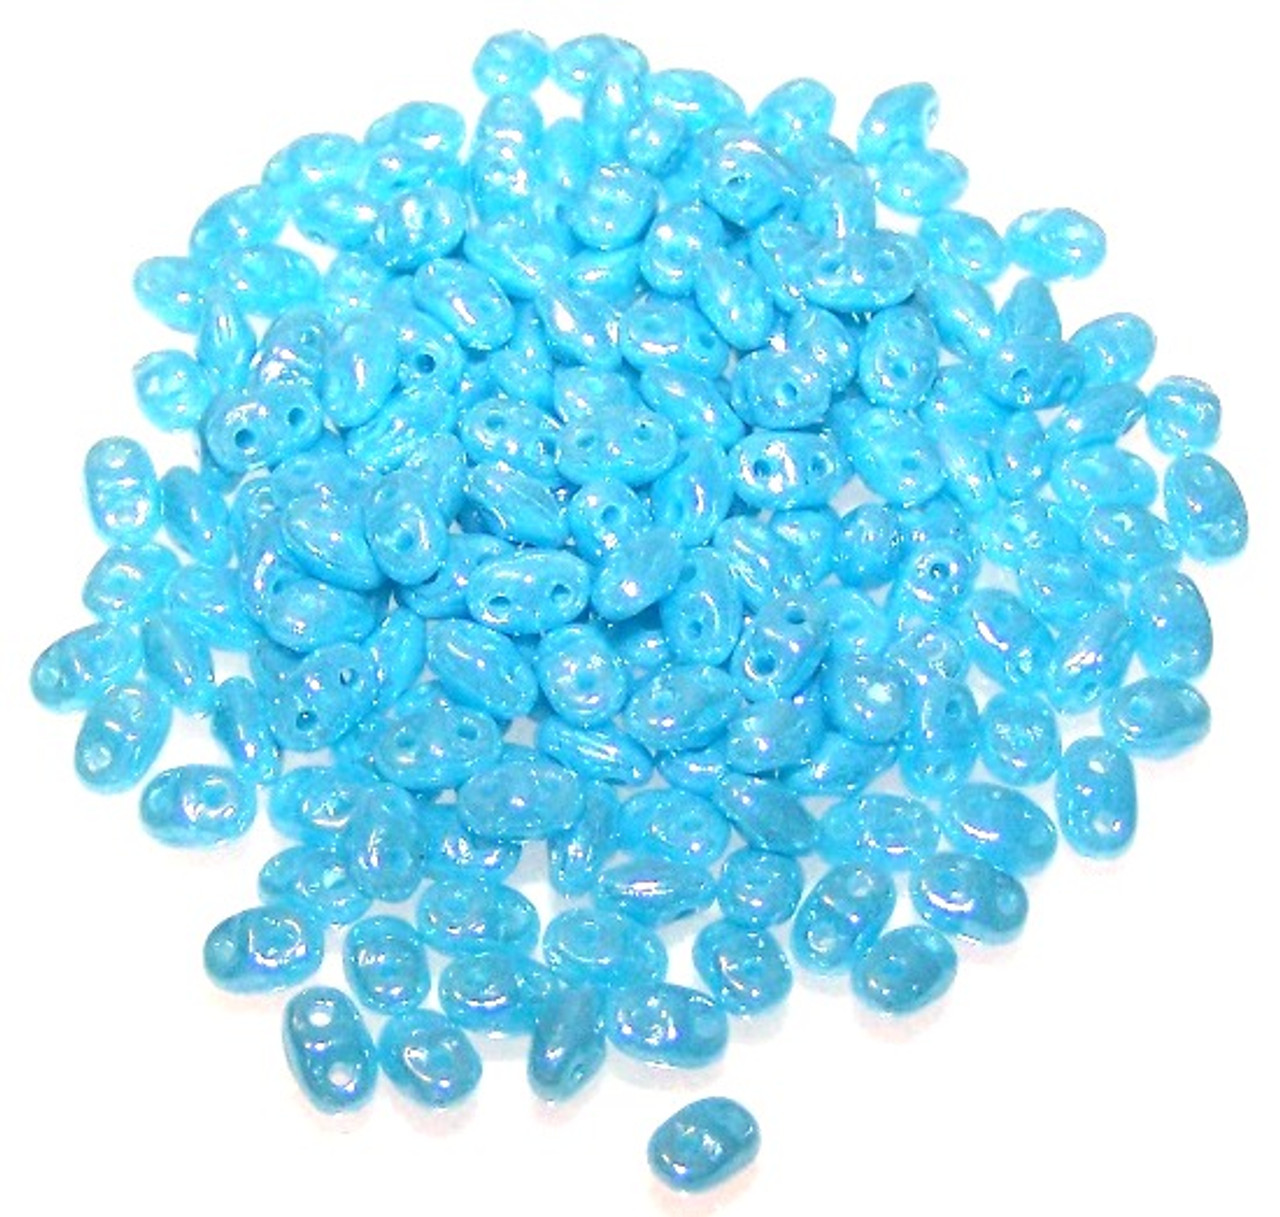 7.5 Grams of MiniDuo Czech Glass Beads - Turquoise Blue White Luster